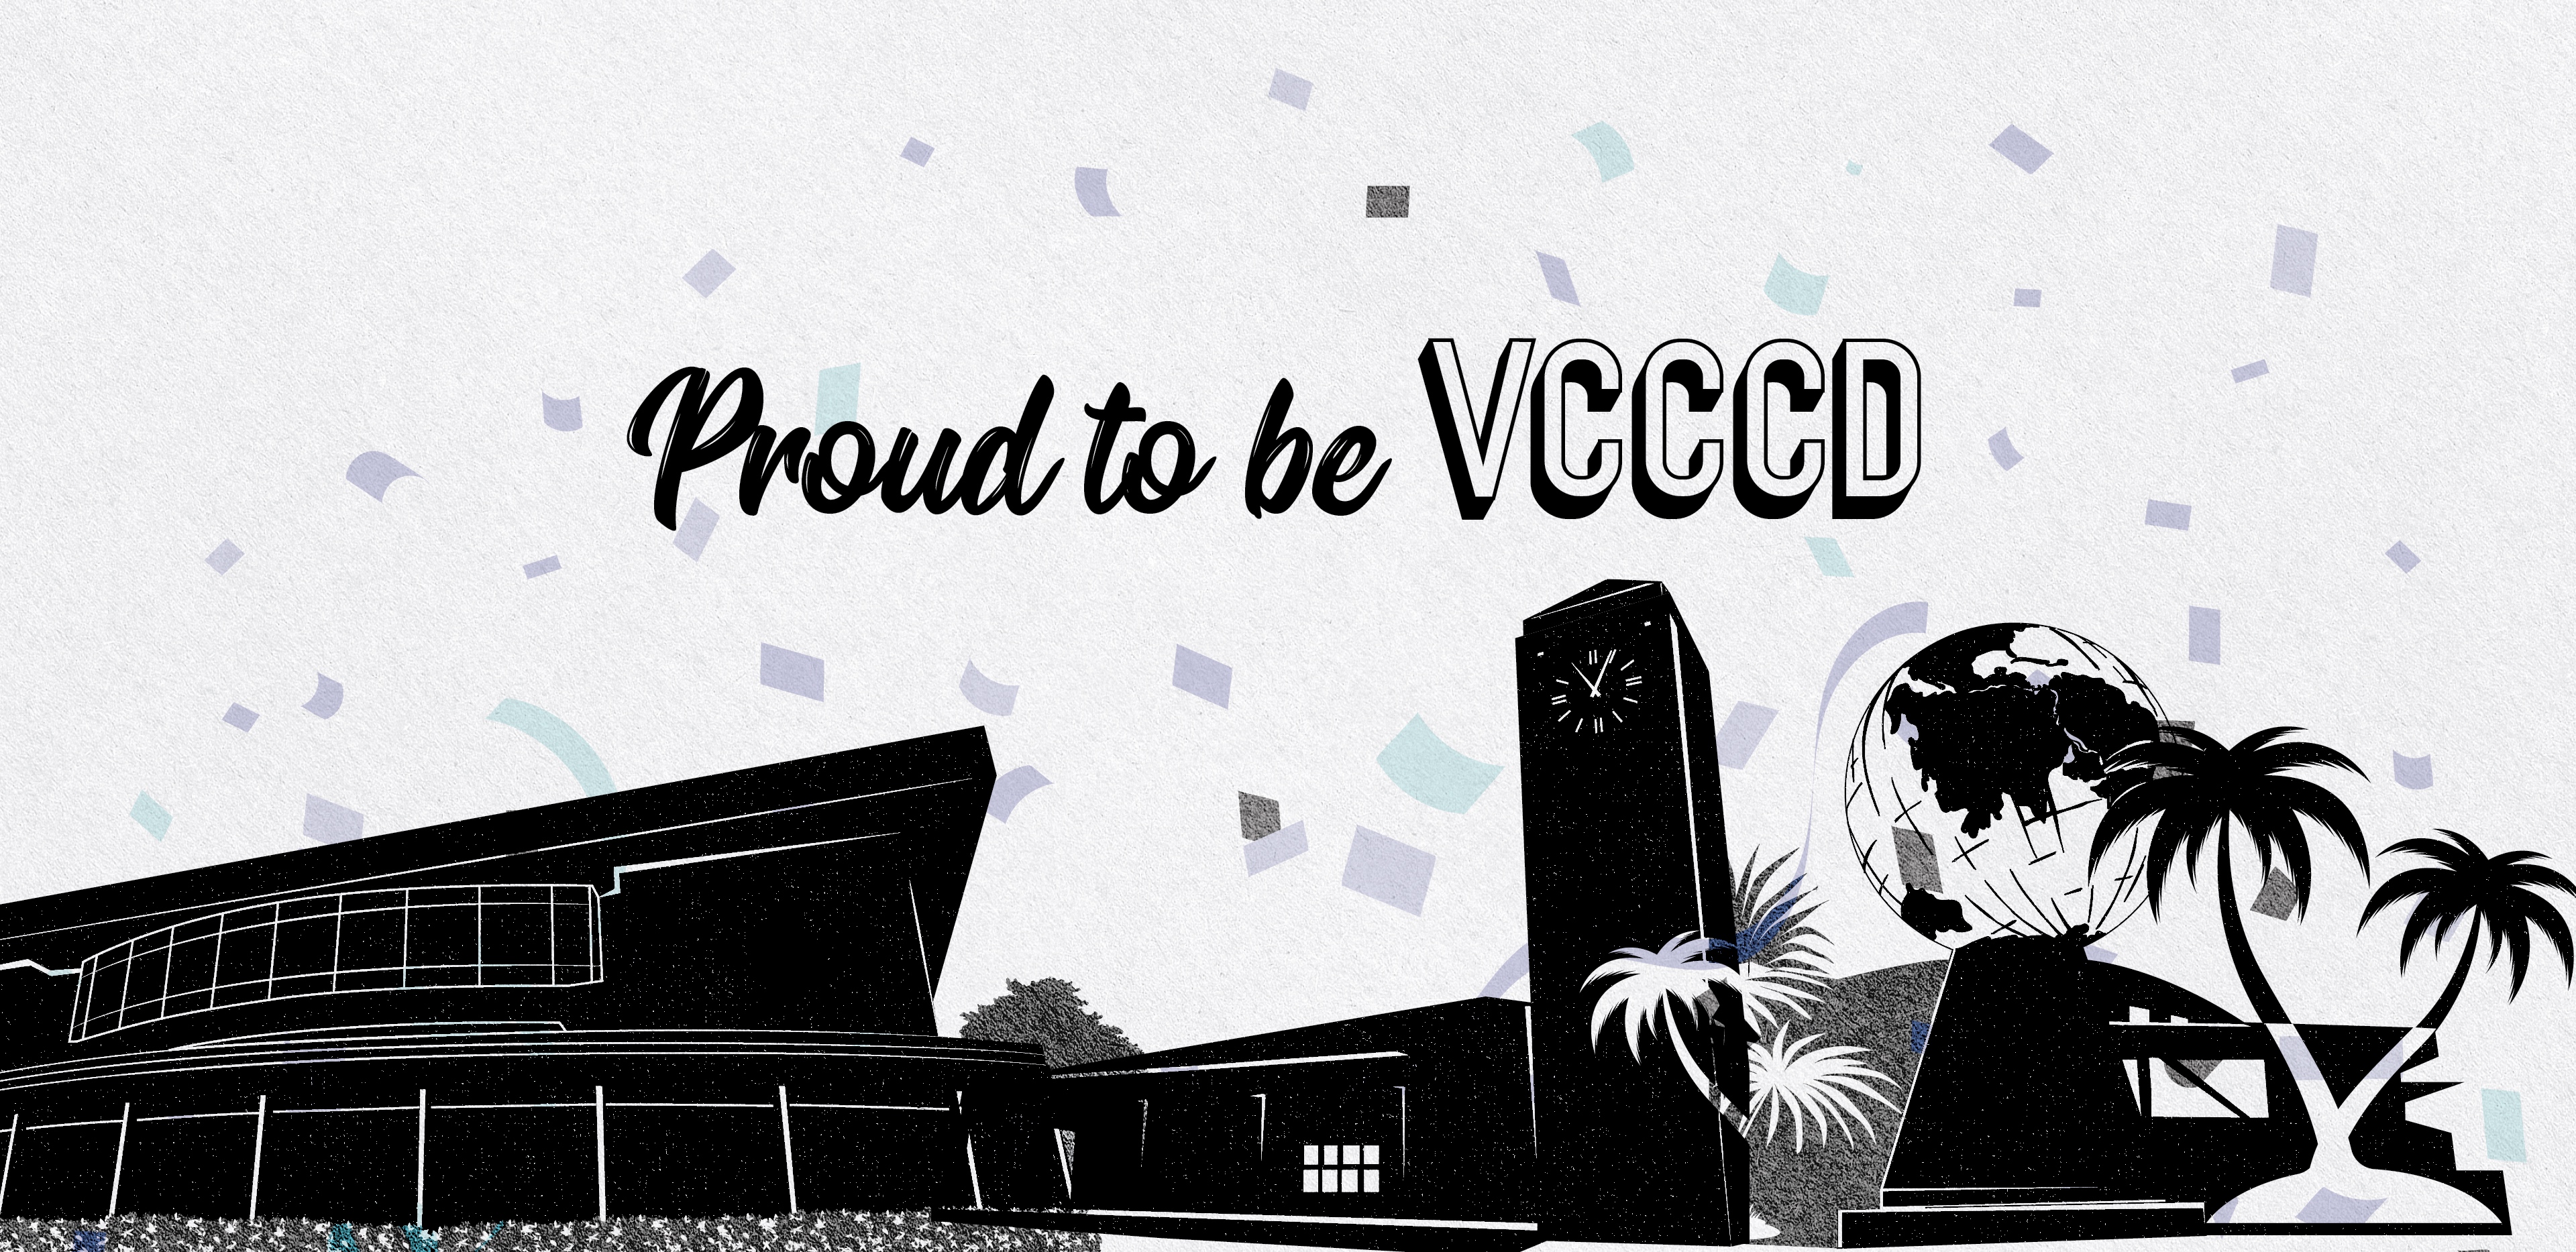 Black silhouettes of buildings from MC, OC, VC with lavender and blue confetti; text "Proud to be ϲ"